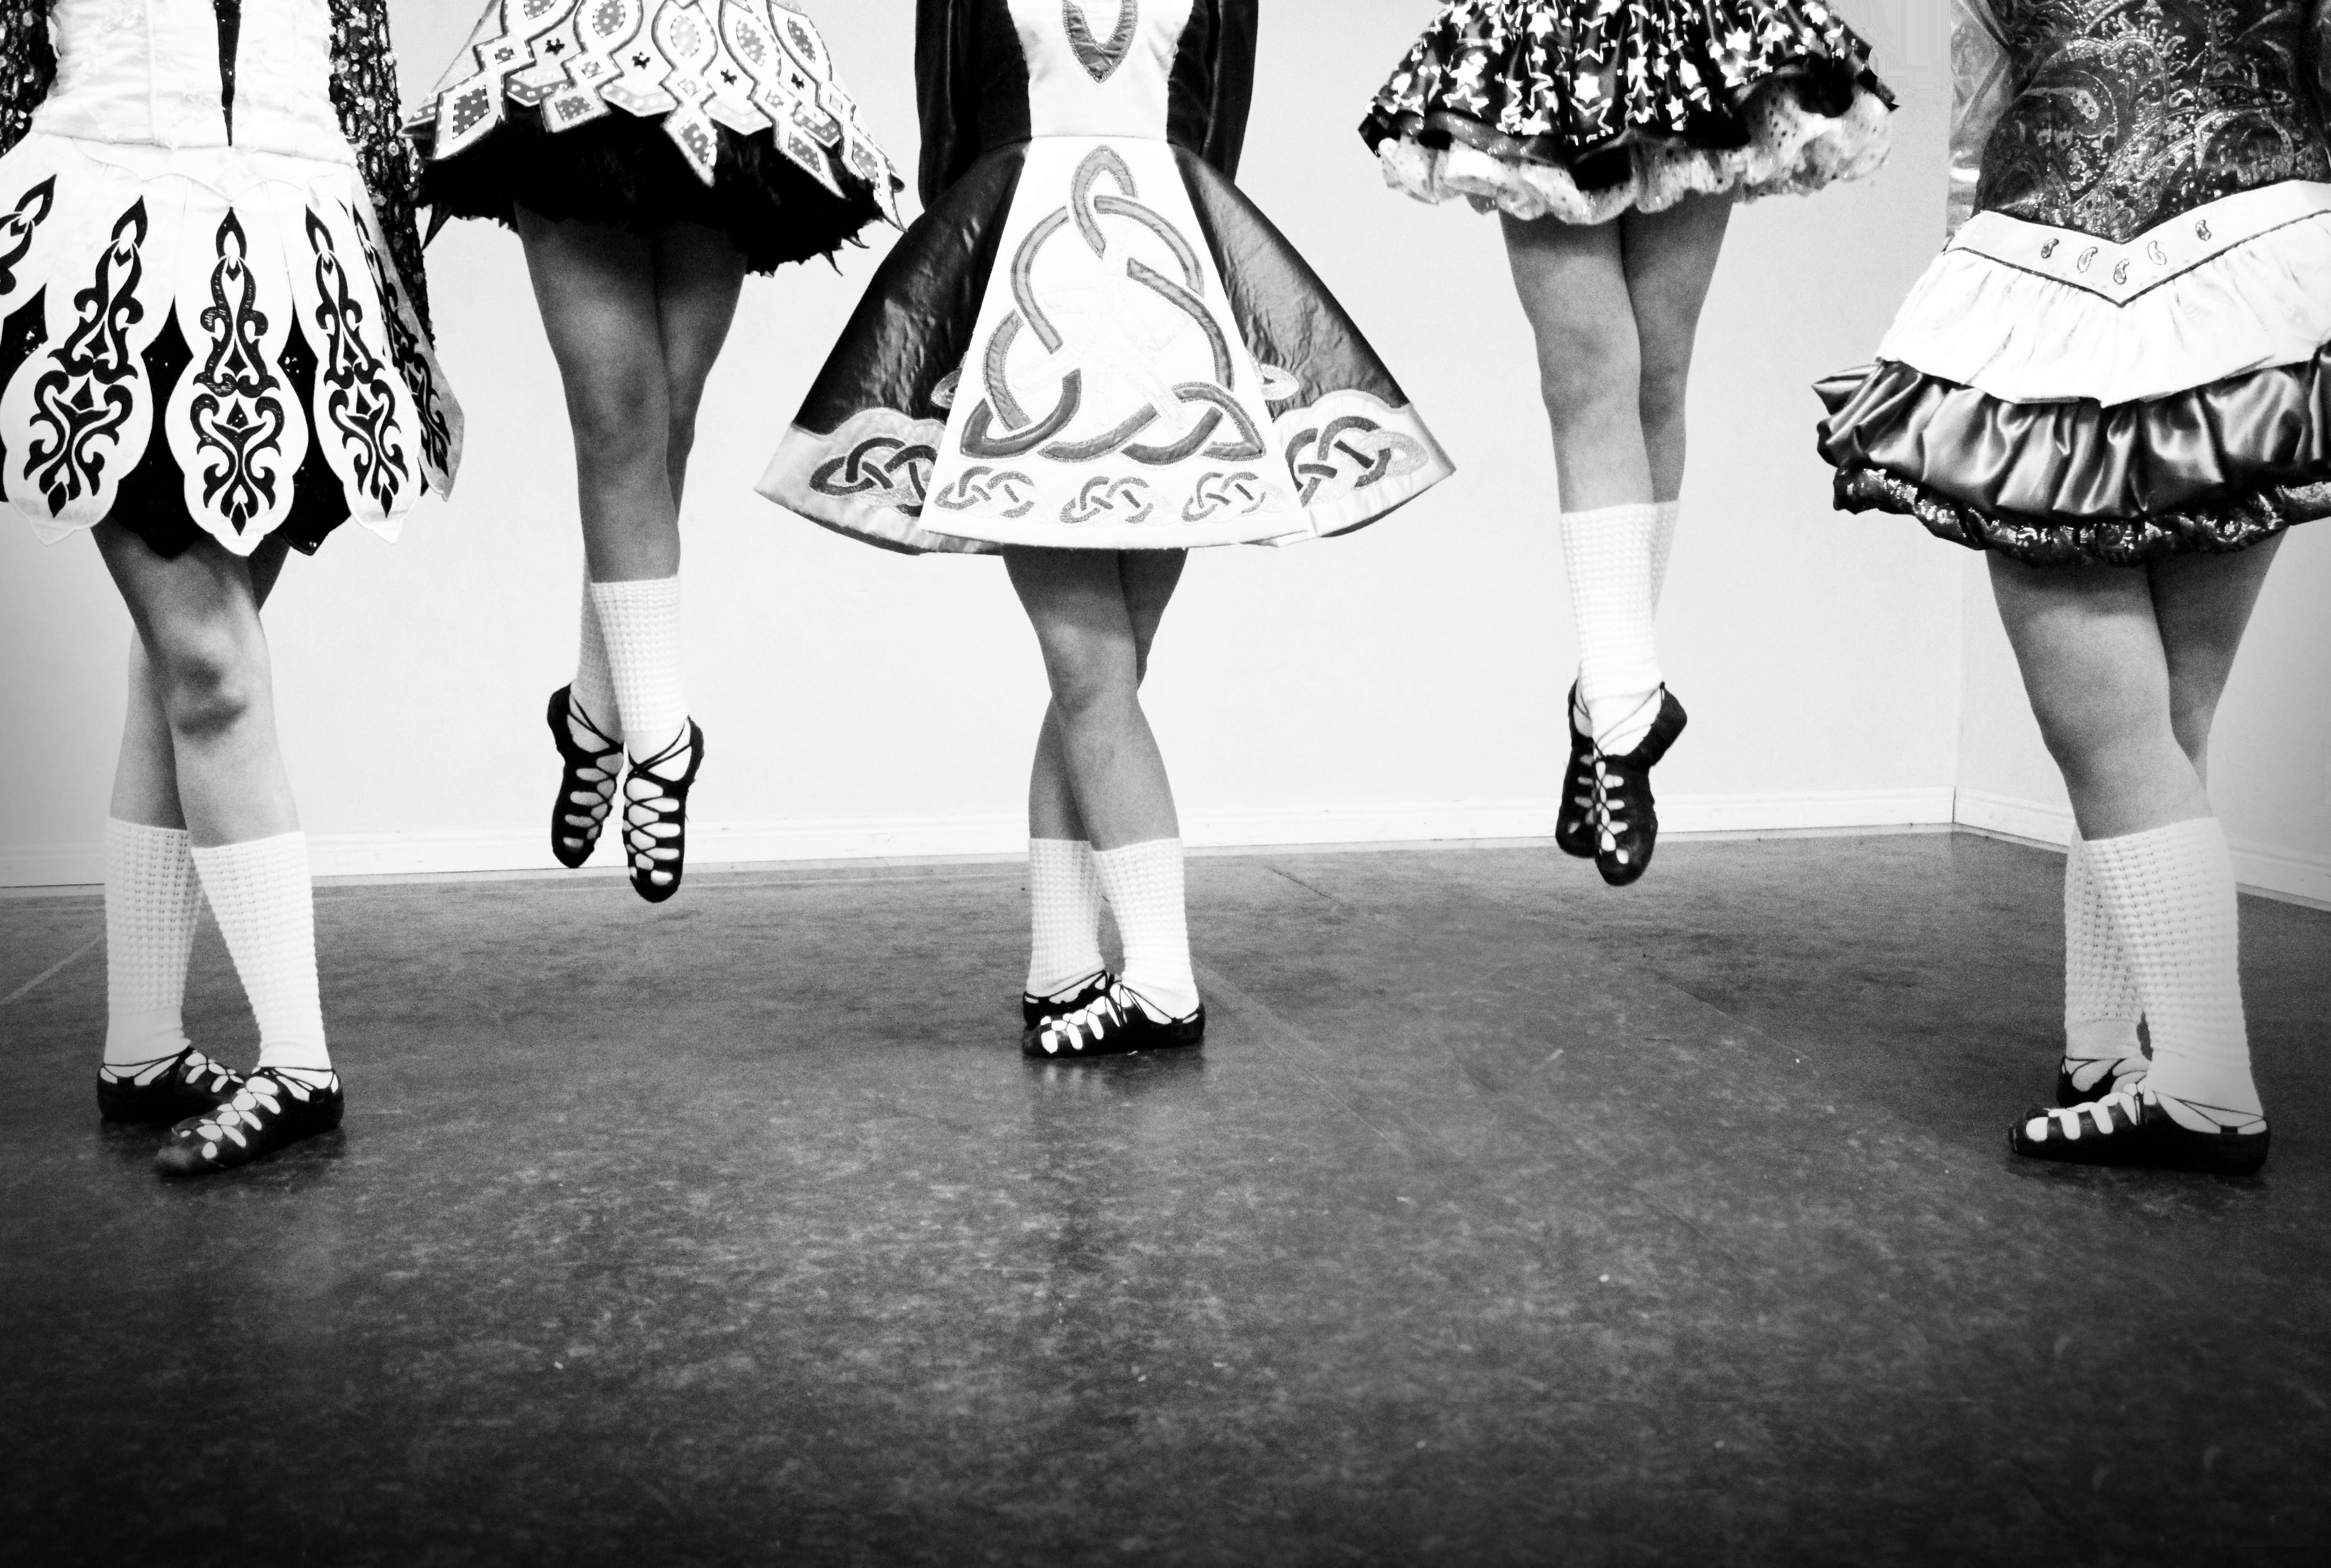 Photo in black and white, legs and lower torsos of Irish step dancers 